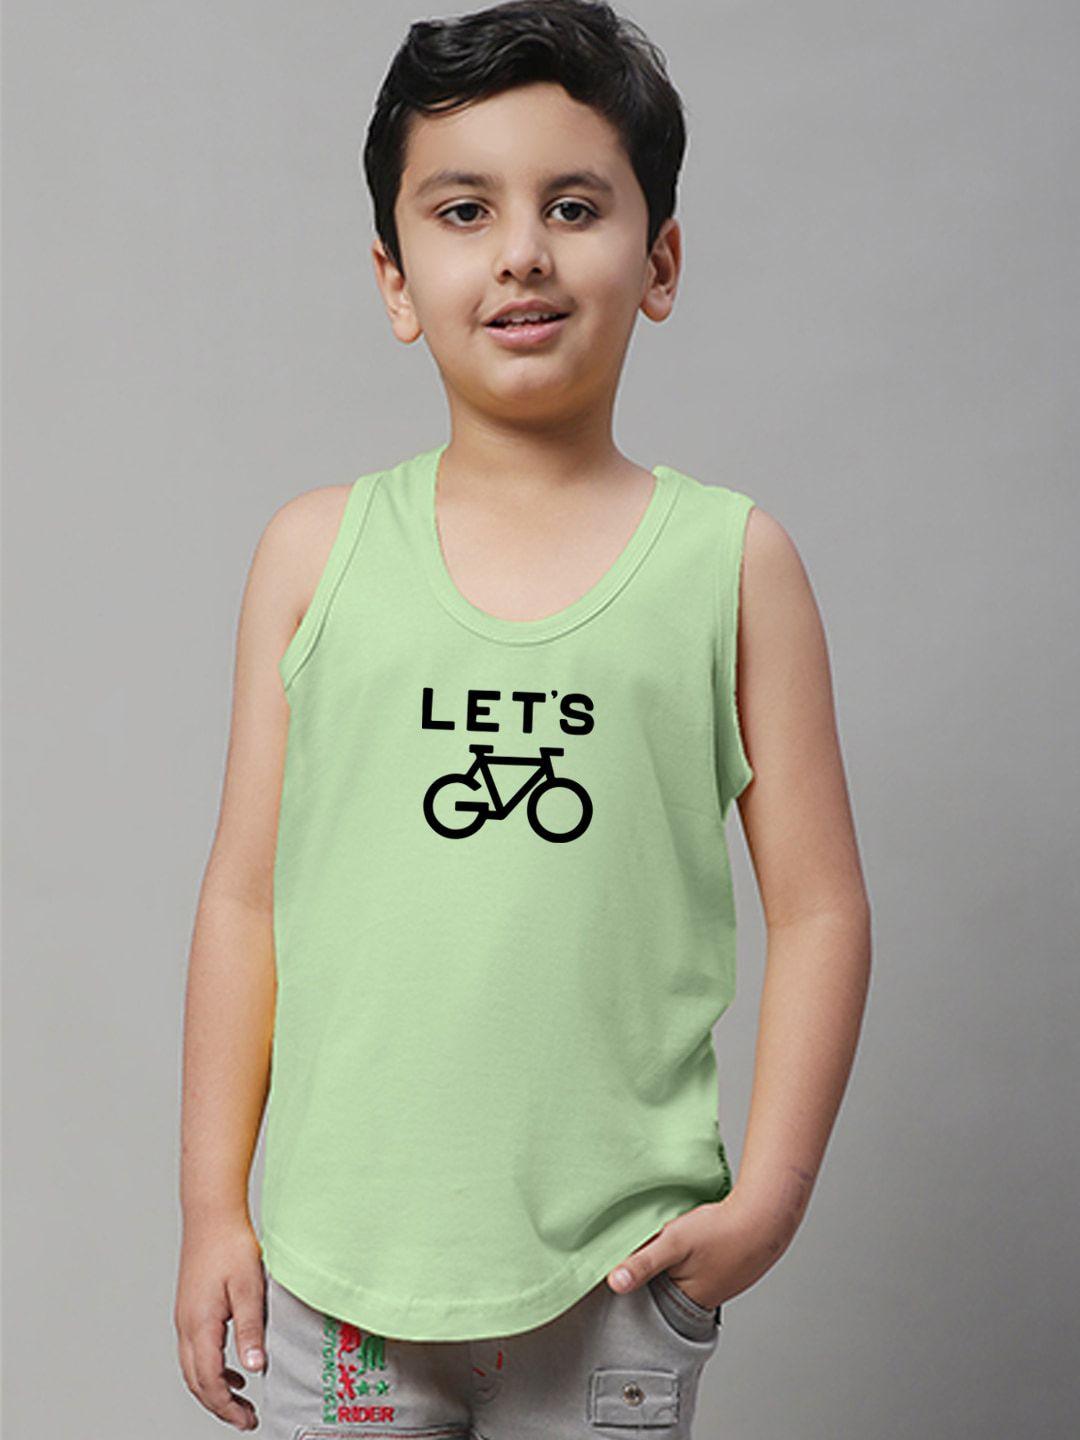 Friskers Boys Printed Round Neck Sleeveless Pure Cotton Gym Innerwear Vests